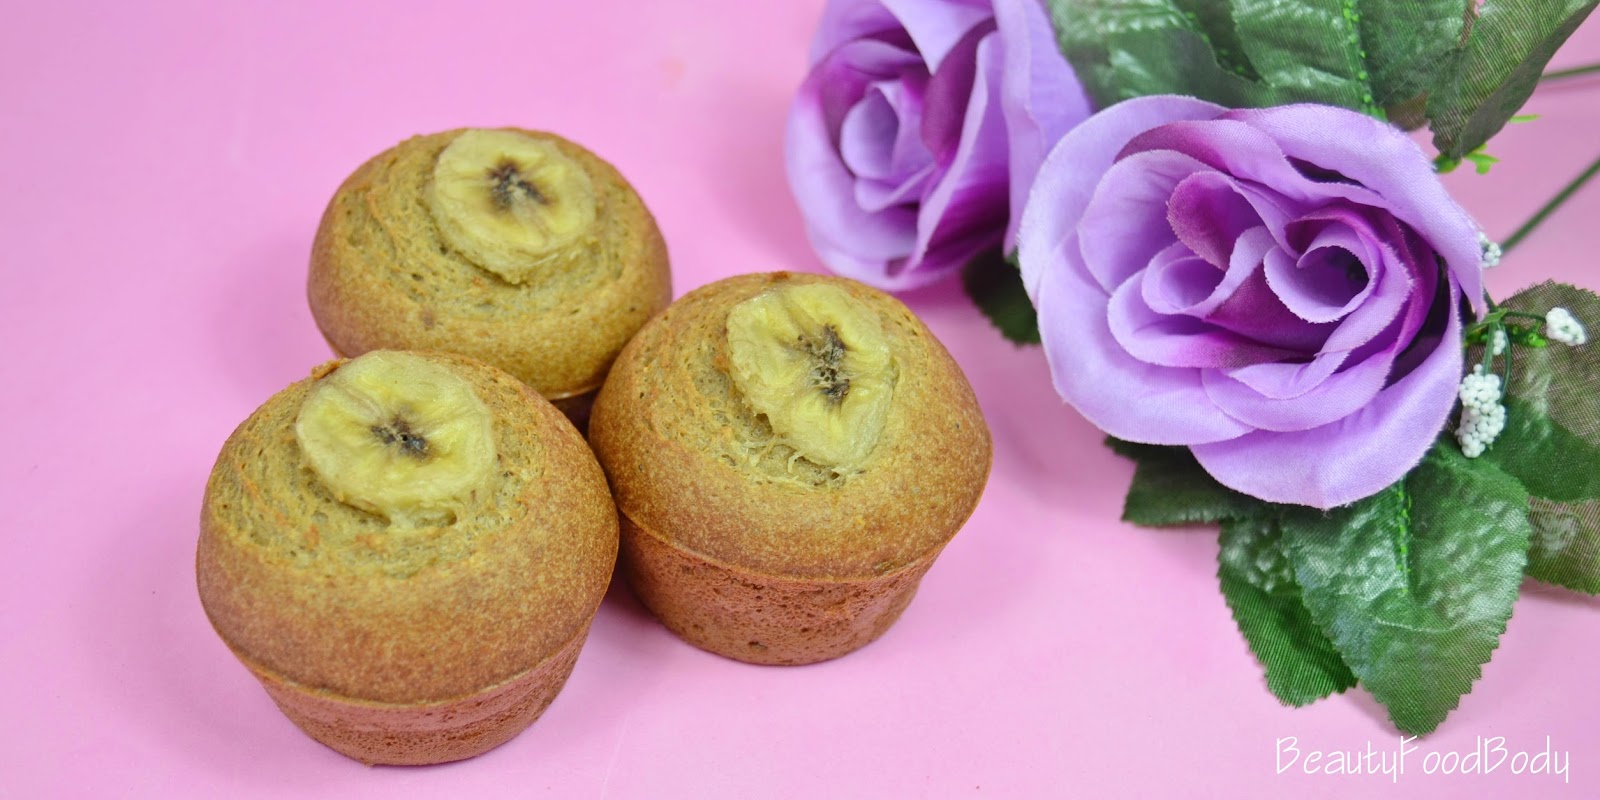 beautyfoodbody cupcakes magdalenas muffin platano coco fit light avena